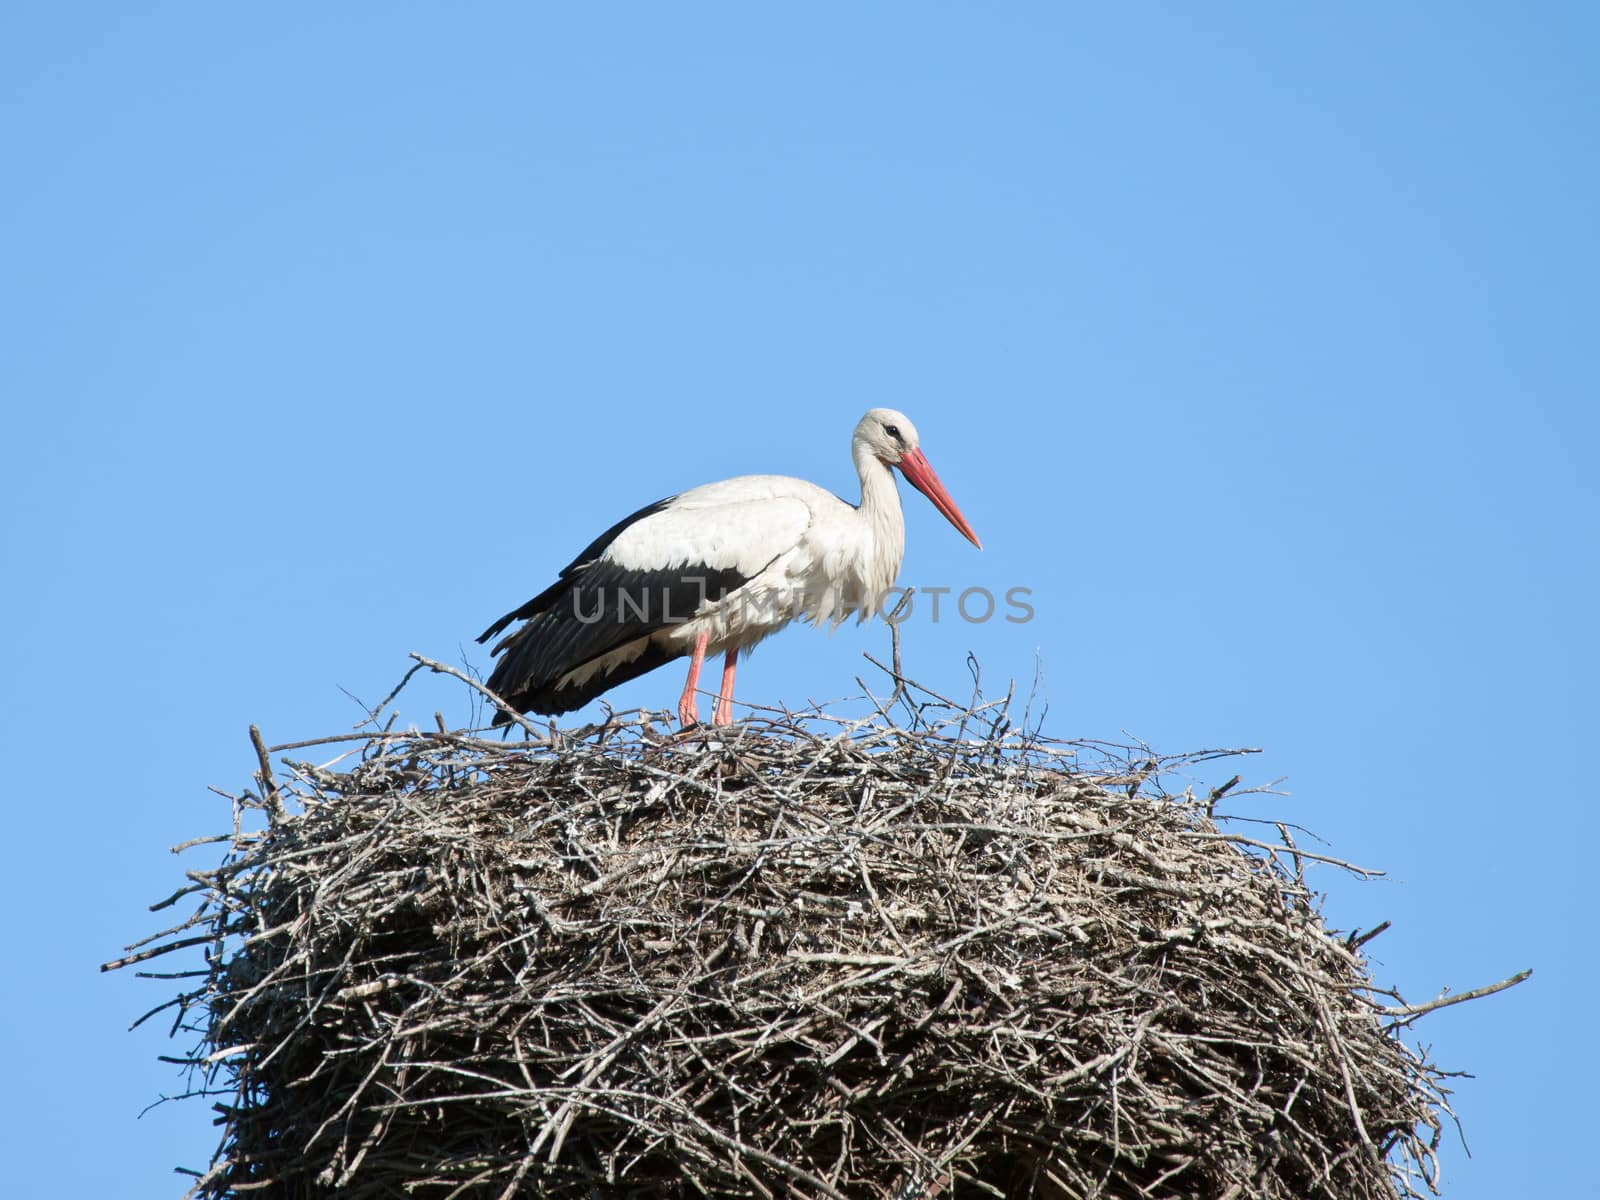 The white stork costs in a big nest from rods against the blue sky